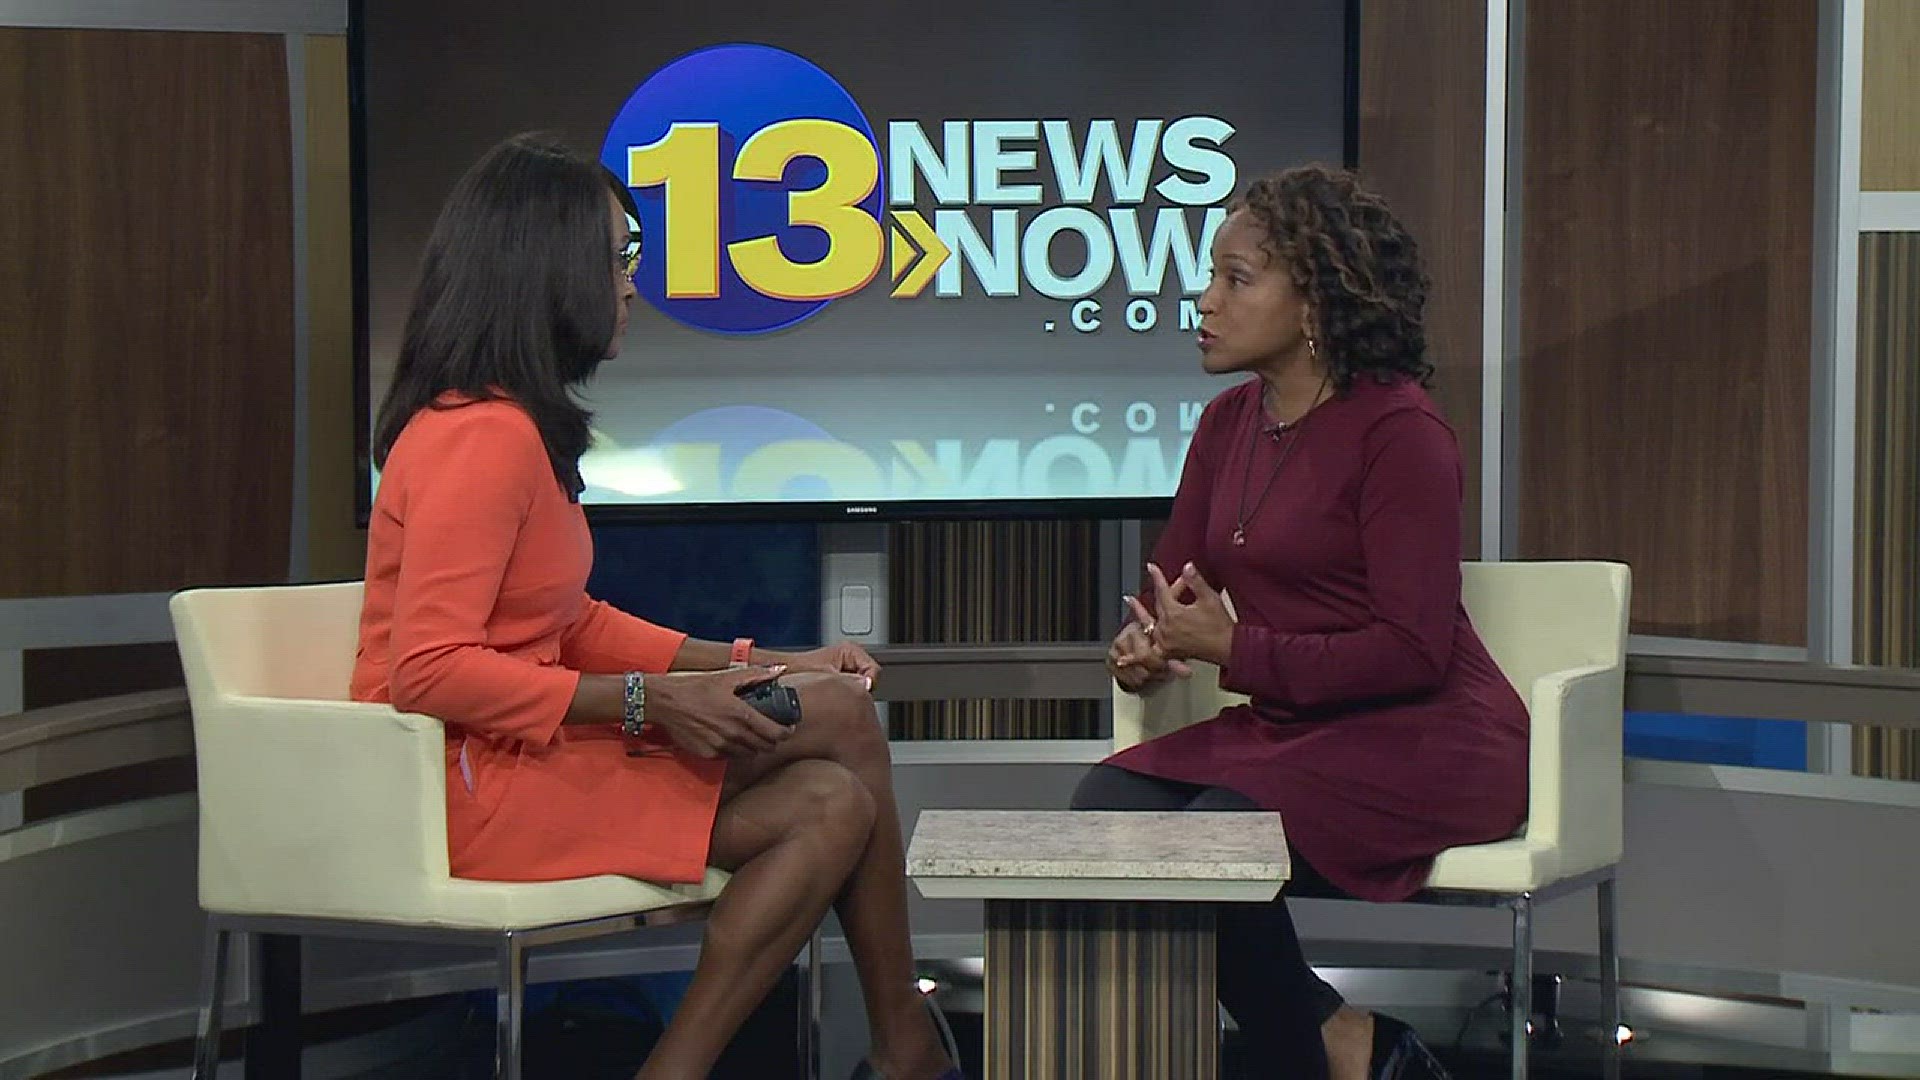 Bonita Harris from Dominion Power sits down with Regina Mobley to discuss possible outages due to potential high winds from the tropical weather.